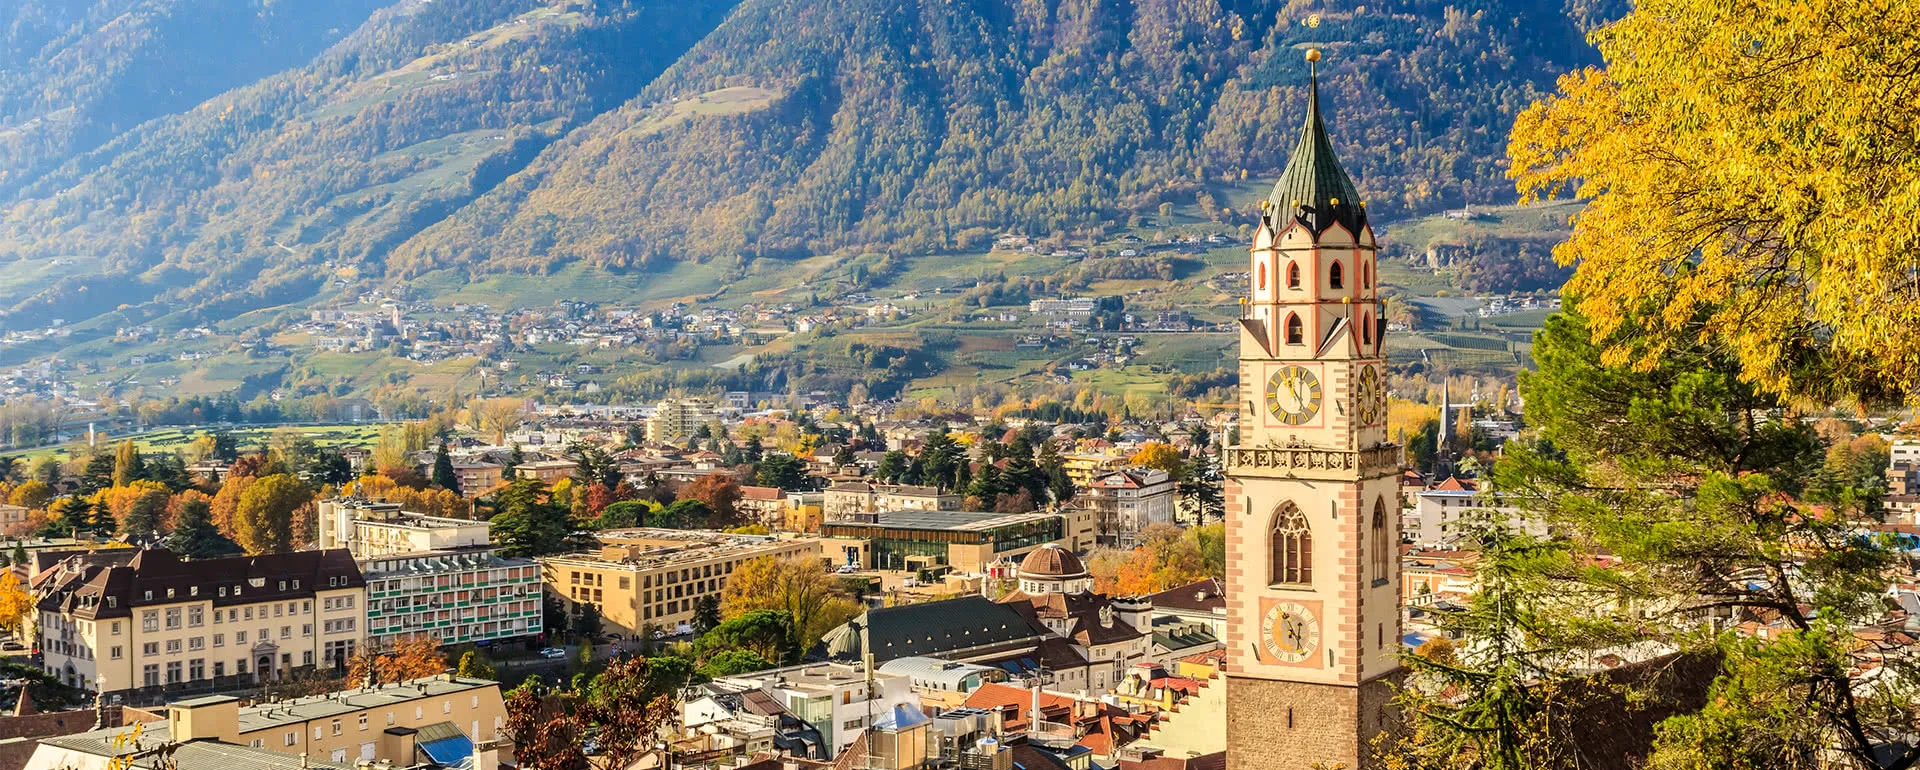 Meran - the destination with youth hostels